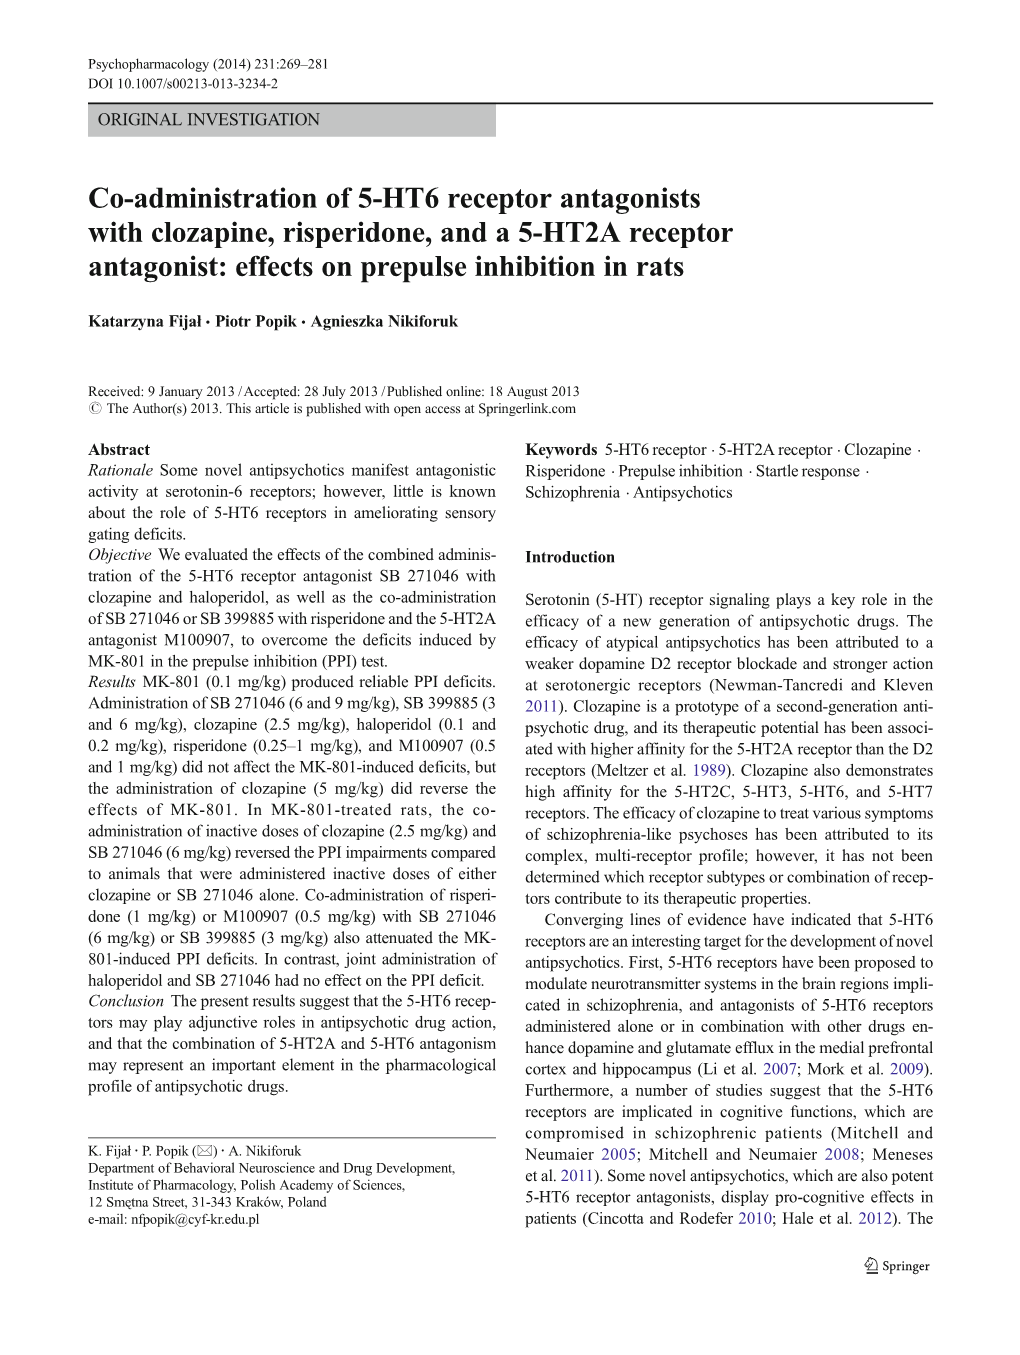 Co-Administration of 5-HT6 Receptor Antagonists with Clozapine, Risperidone, and a 5-HT2A Receptor Antagonist: Effects on Prepulse Inhibition in Rats